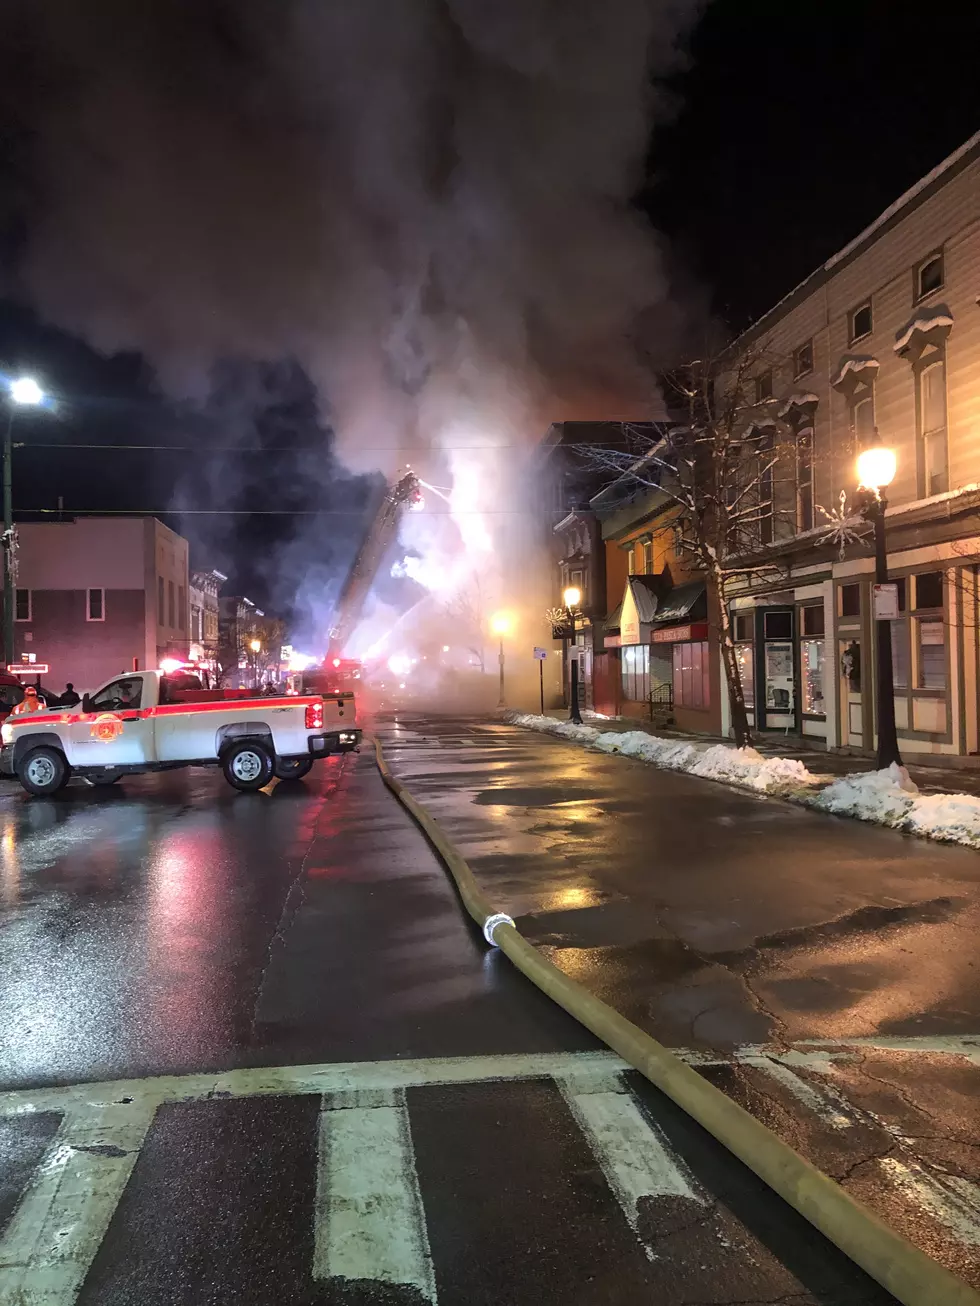 Go Fund Me Set Up to Help Victims of Massive Boonville Fire Rebuild